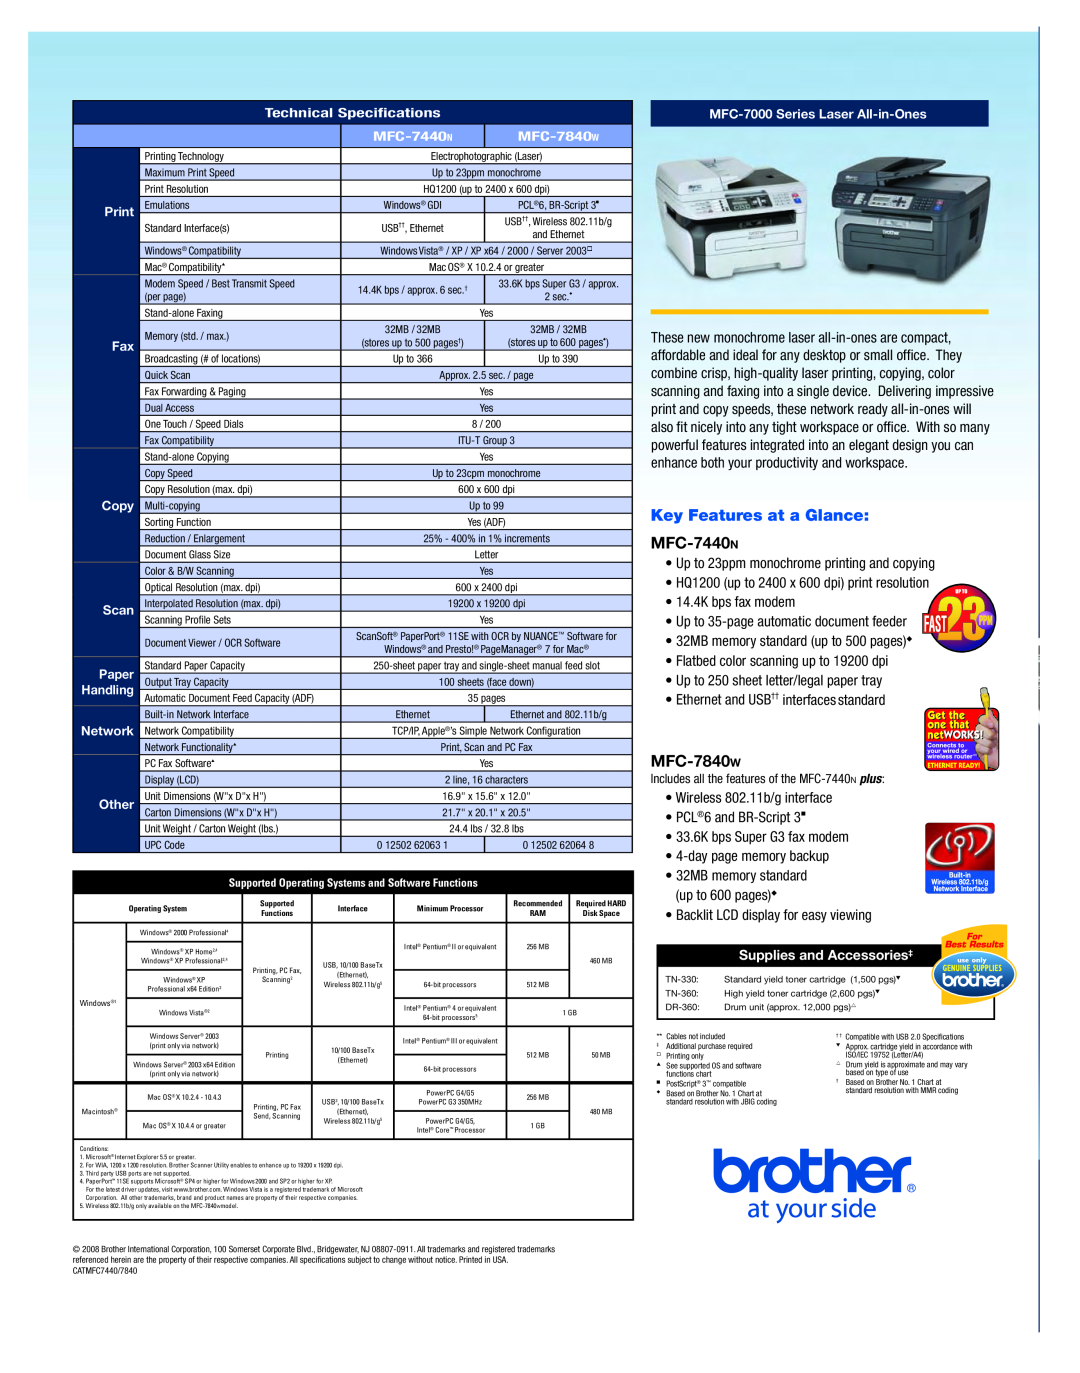 Brother MFC-7000 manual Key Features at a Glance, MFC-7440n, MFC-7840w 